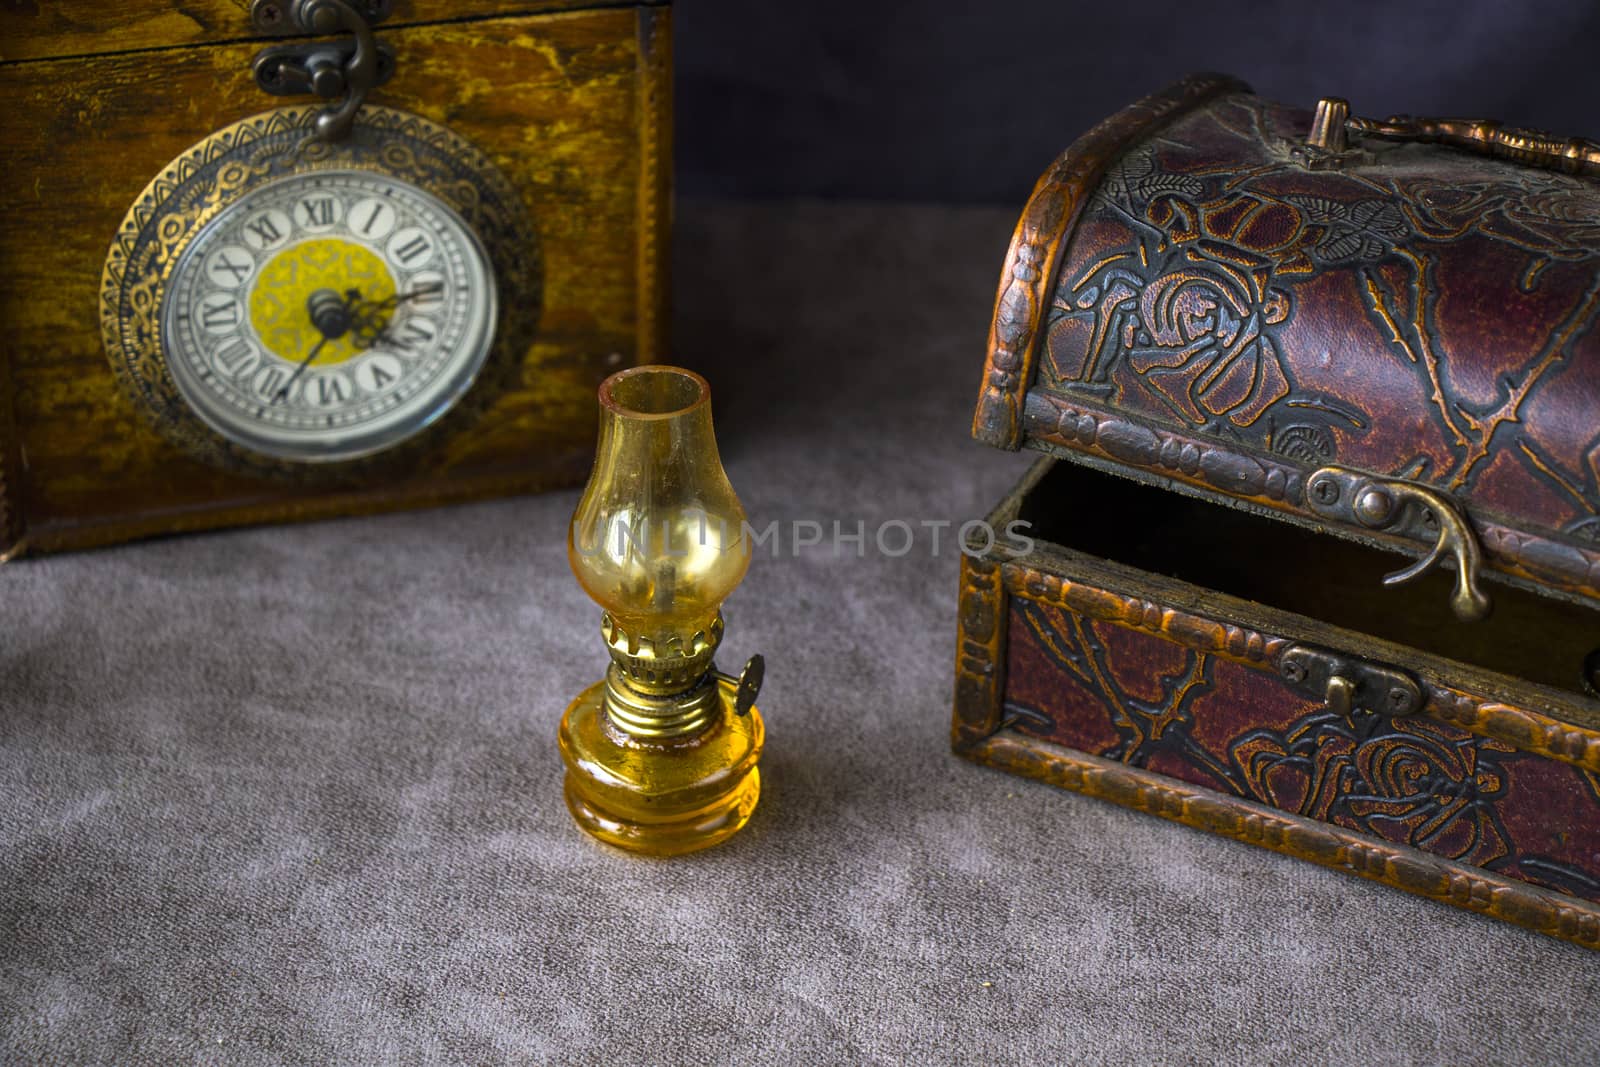 Vintage objects on the table by Taidundua